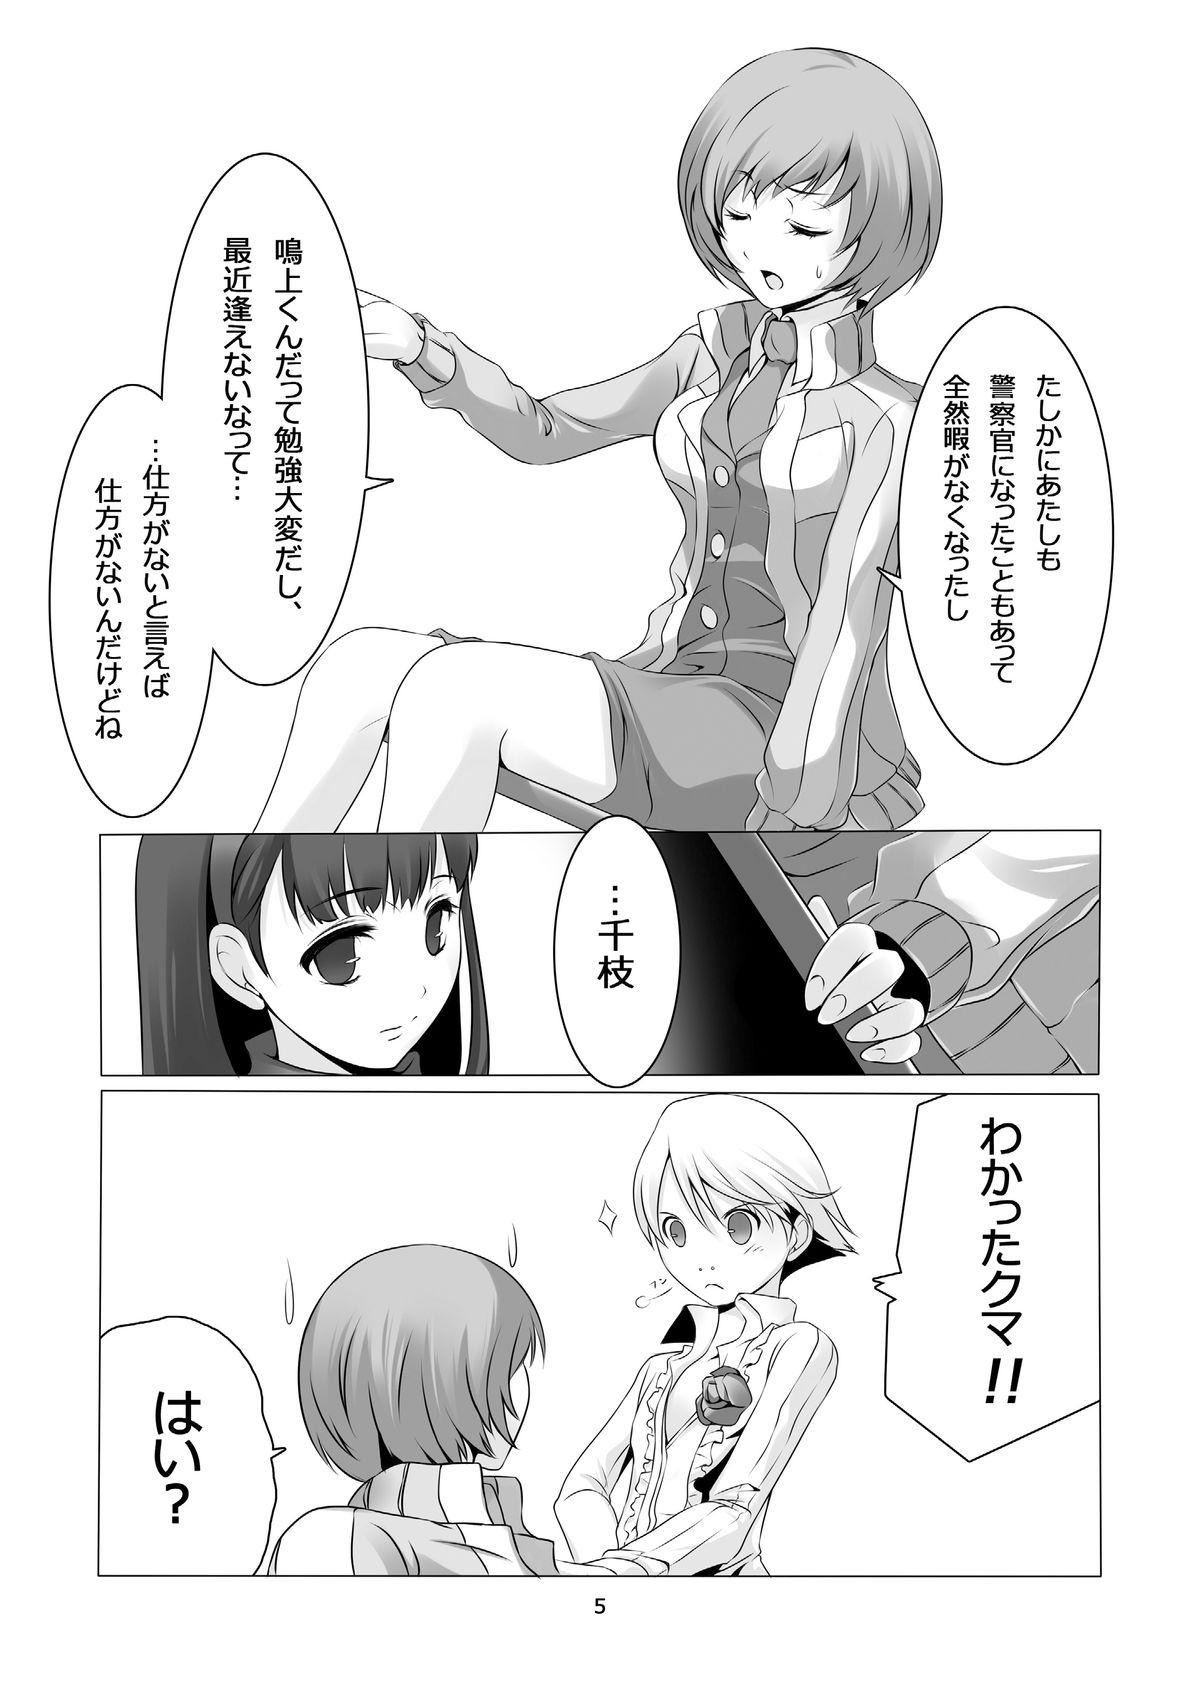 Transgender Persona 4: The Doujin #2 - Persona 4 Sex Toys - Page 7